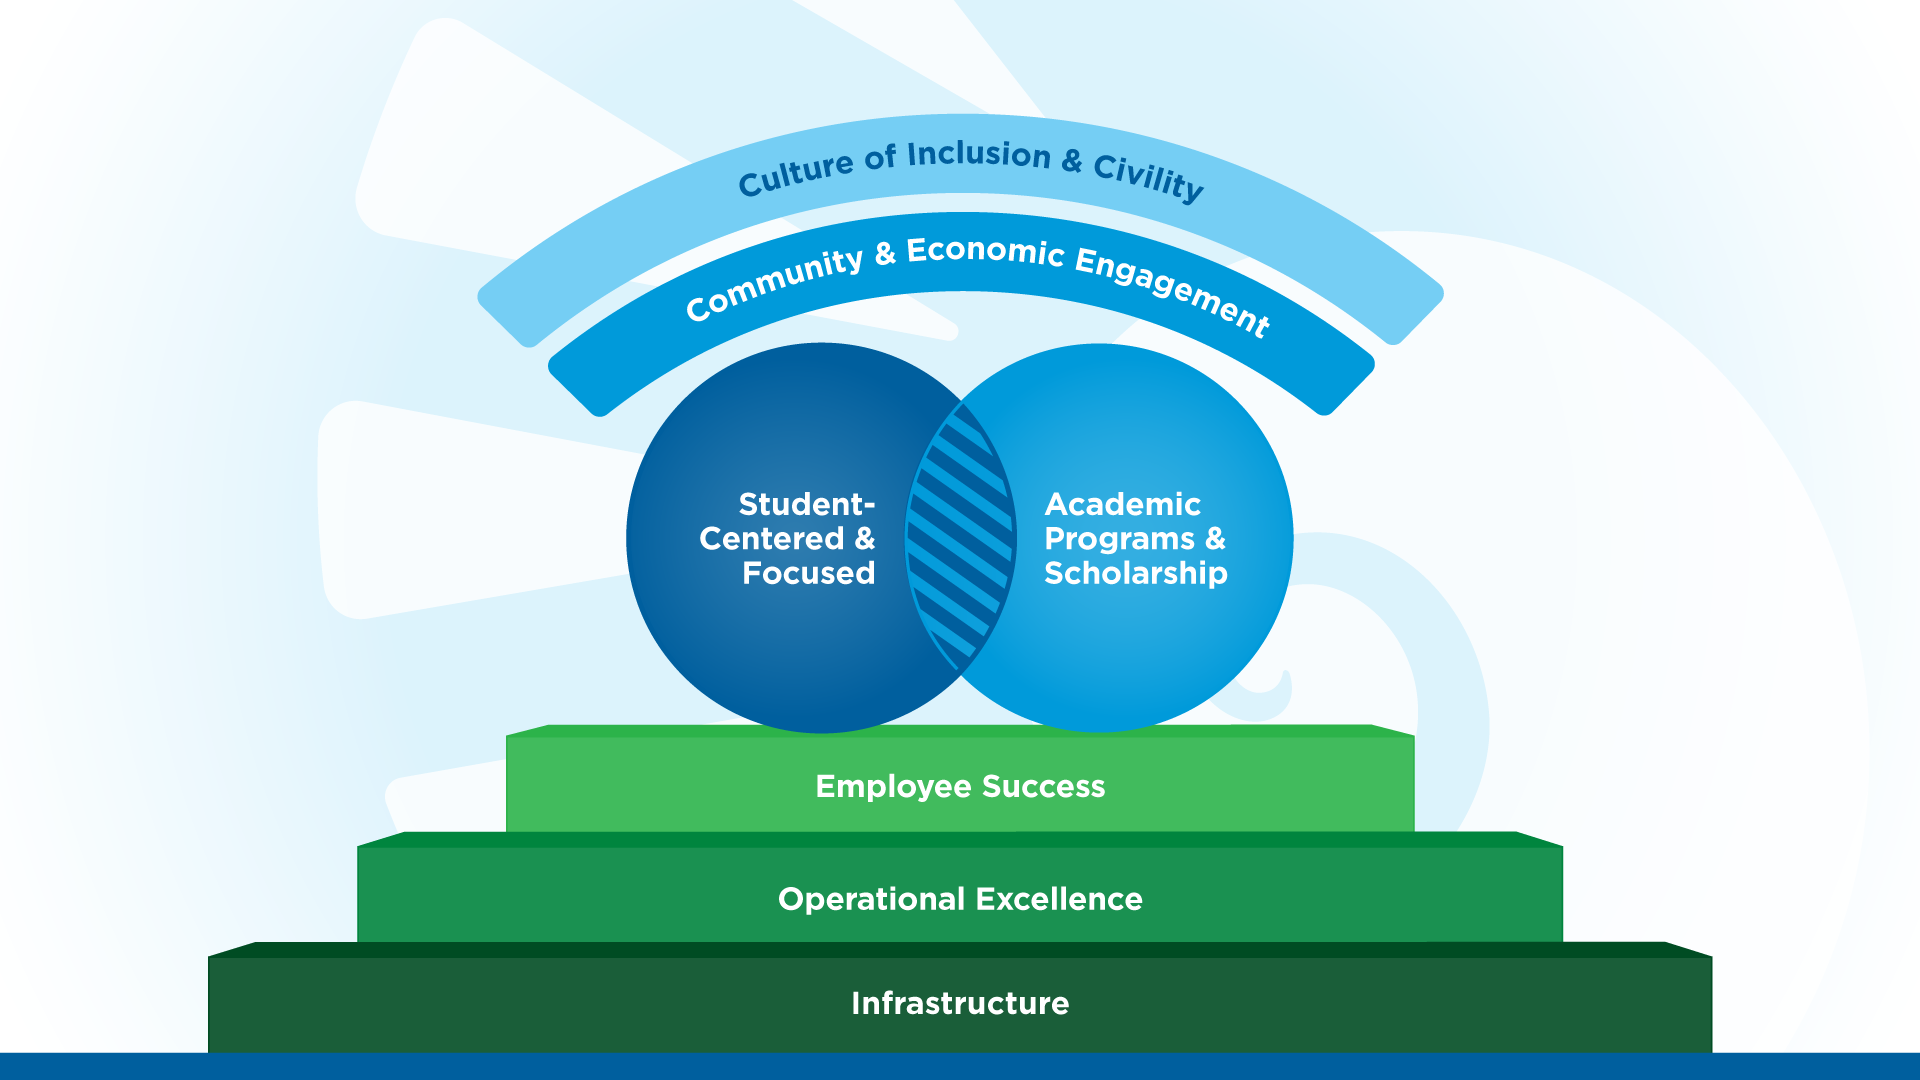 “Culture of Inclusion & Civility” and “Community & Economic Engagement” above overlapping circles showing “Student-Centered & Focused” and “Academic Programs & Scholarship,” on a foundation of “Employee Success,” “Operational Excellence” and “Infrastructure”